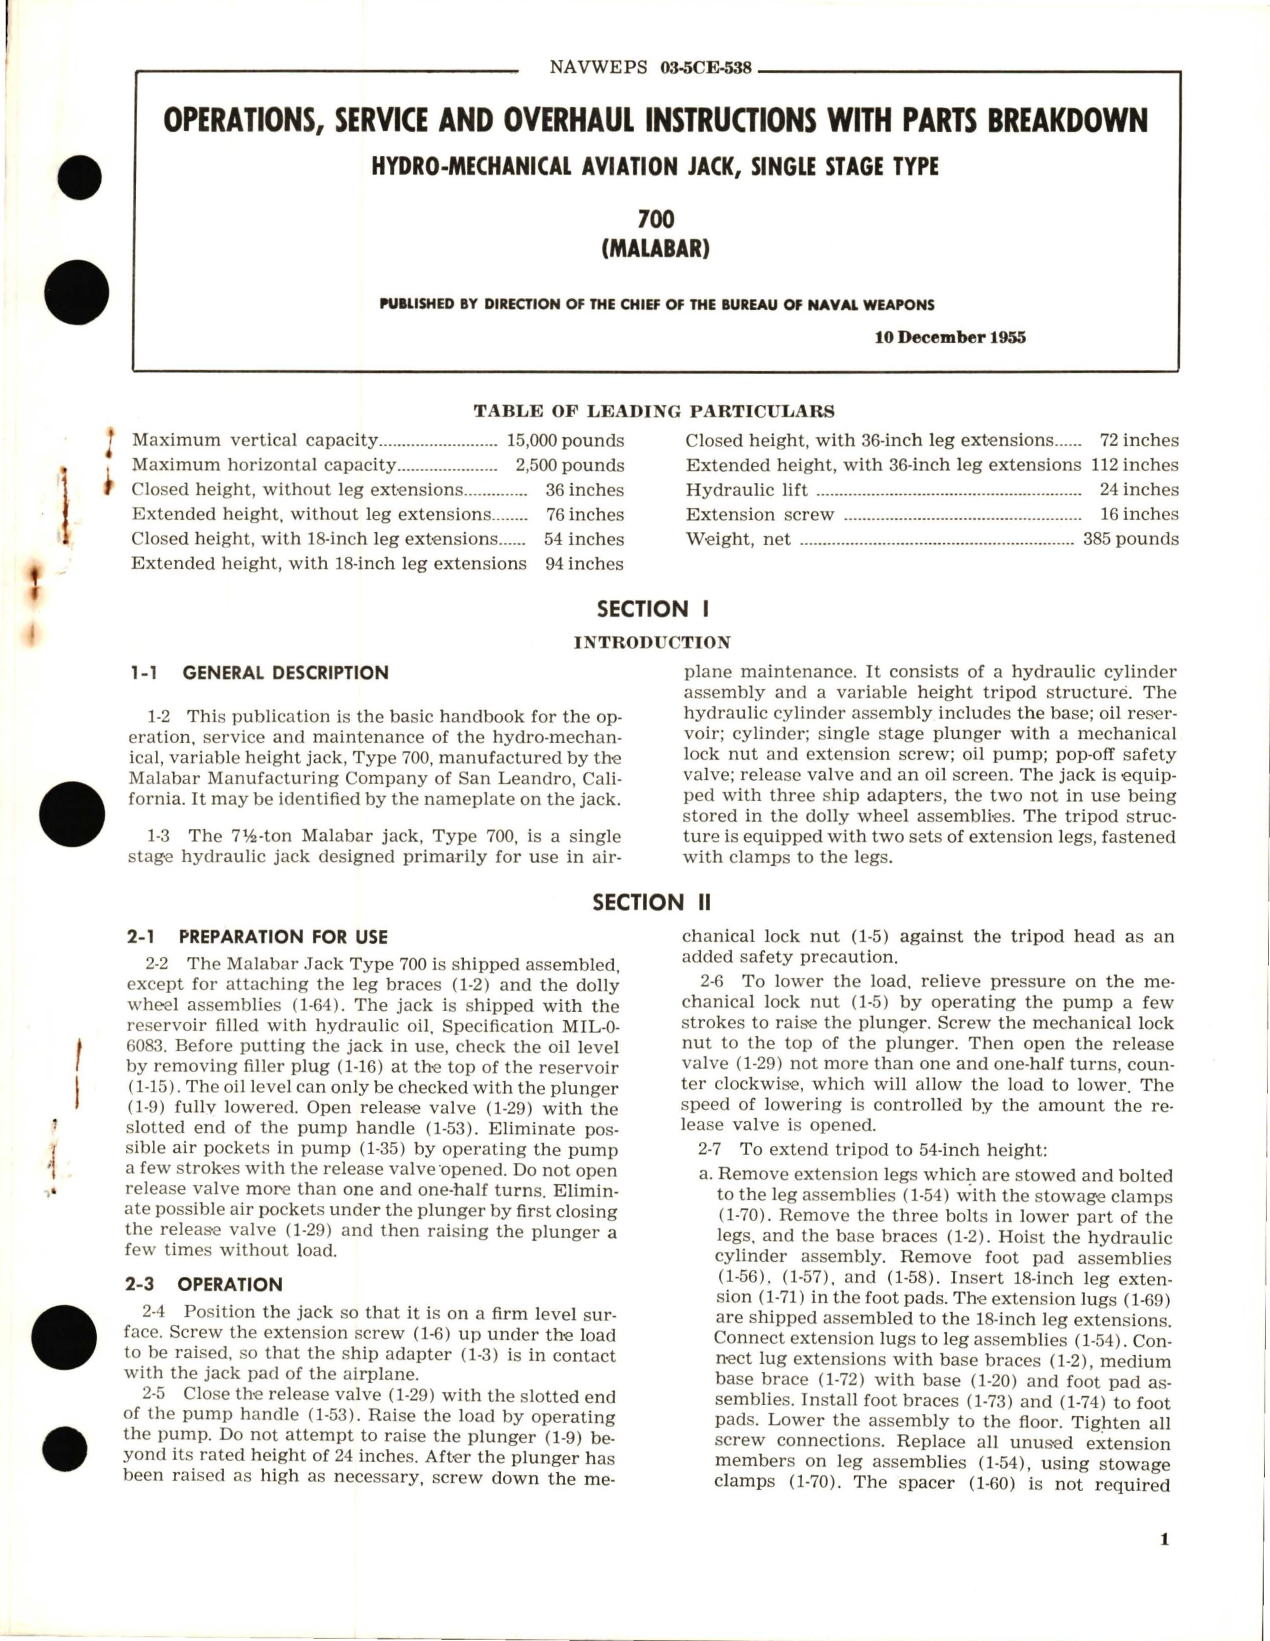 Sample page 1 from AirCorps Library document: Operations, Service and Overhaul Instructions with Parts Breakdown for Hydro Mechanical Aviation Jack, Single Stage Type 700